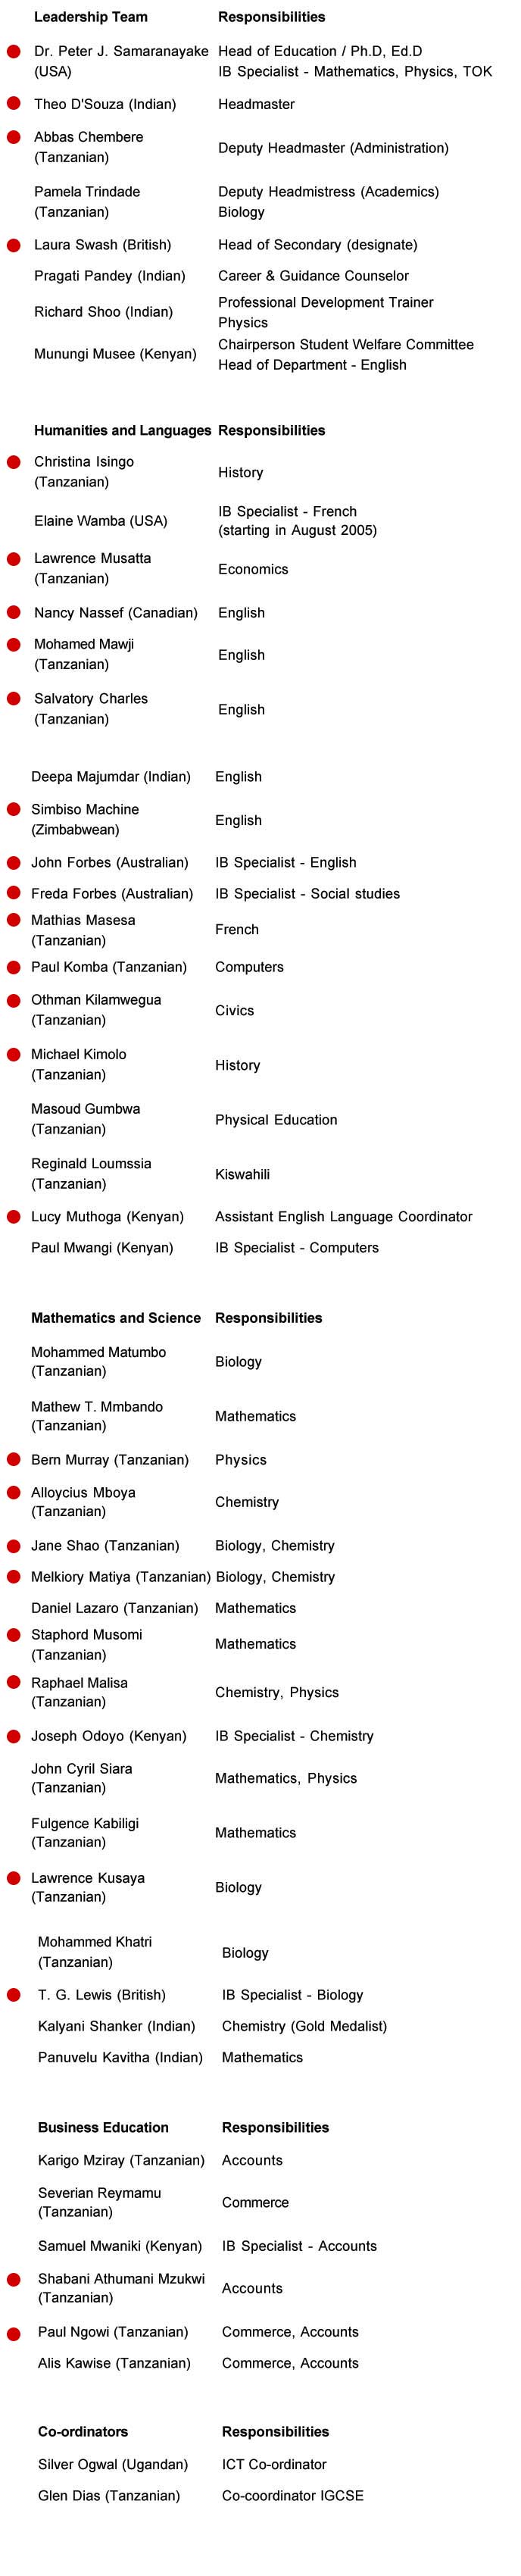 A list of the faculty of AKMSS in 2005 that indicates how many teachers are no longer present at the school